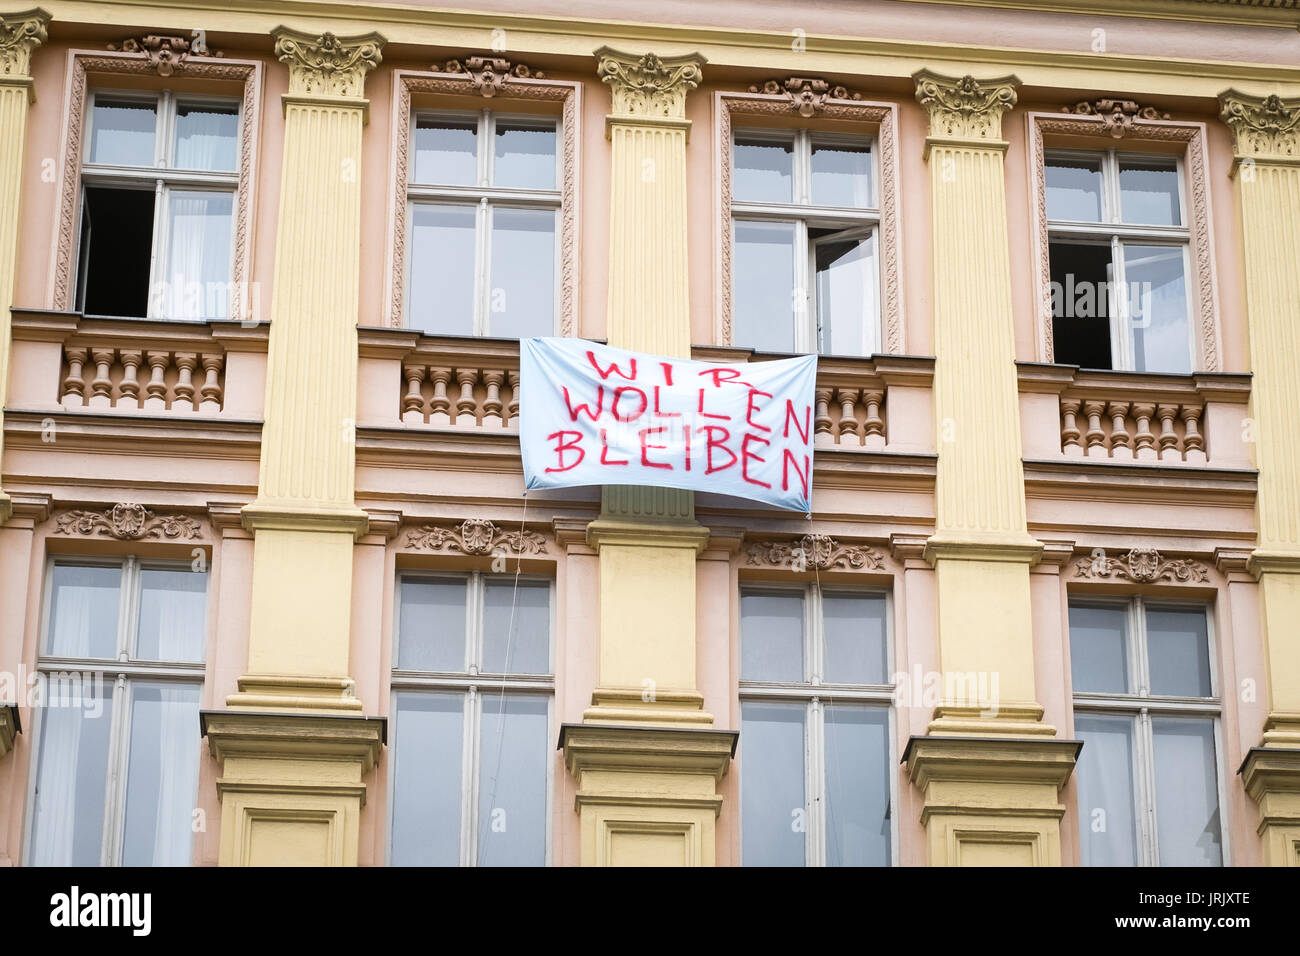 Berlin, Germany - circa august 2017: Protest slogan on building facade in Berlin saying 'We want to stay' (german: Wir wollen bleiben) Stock Photo